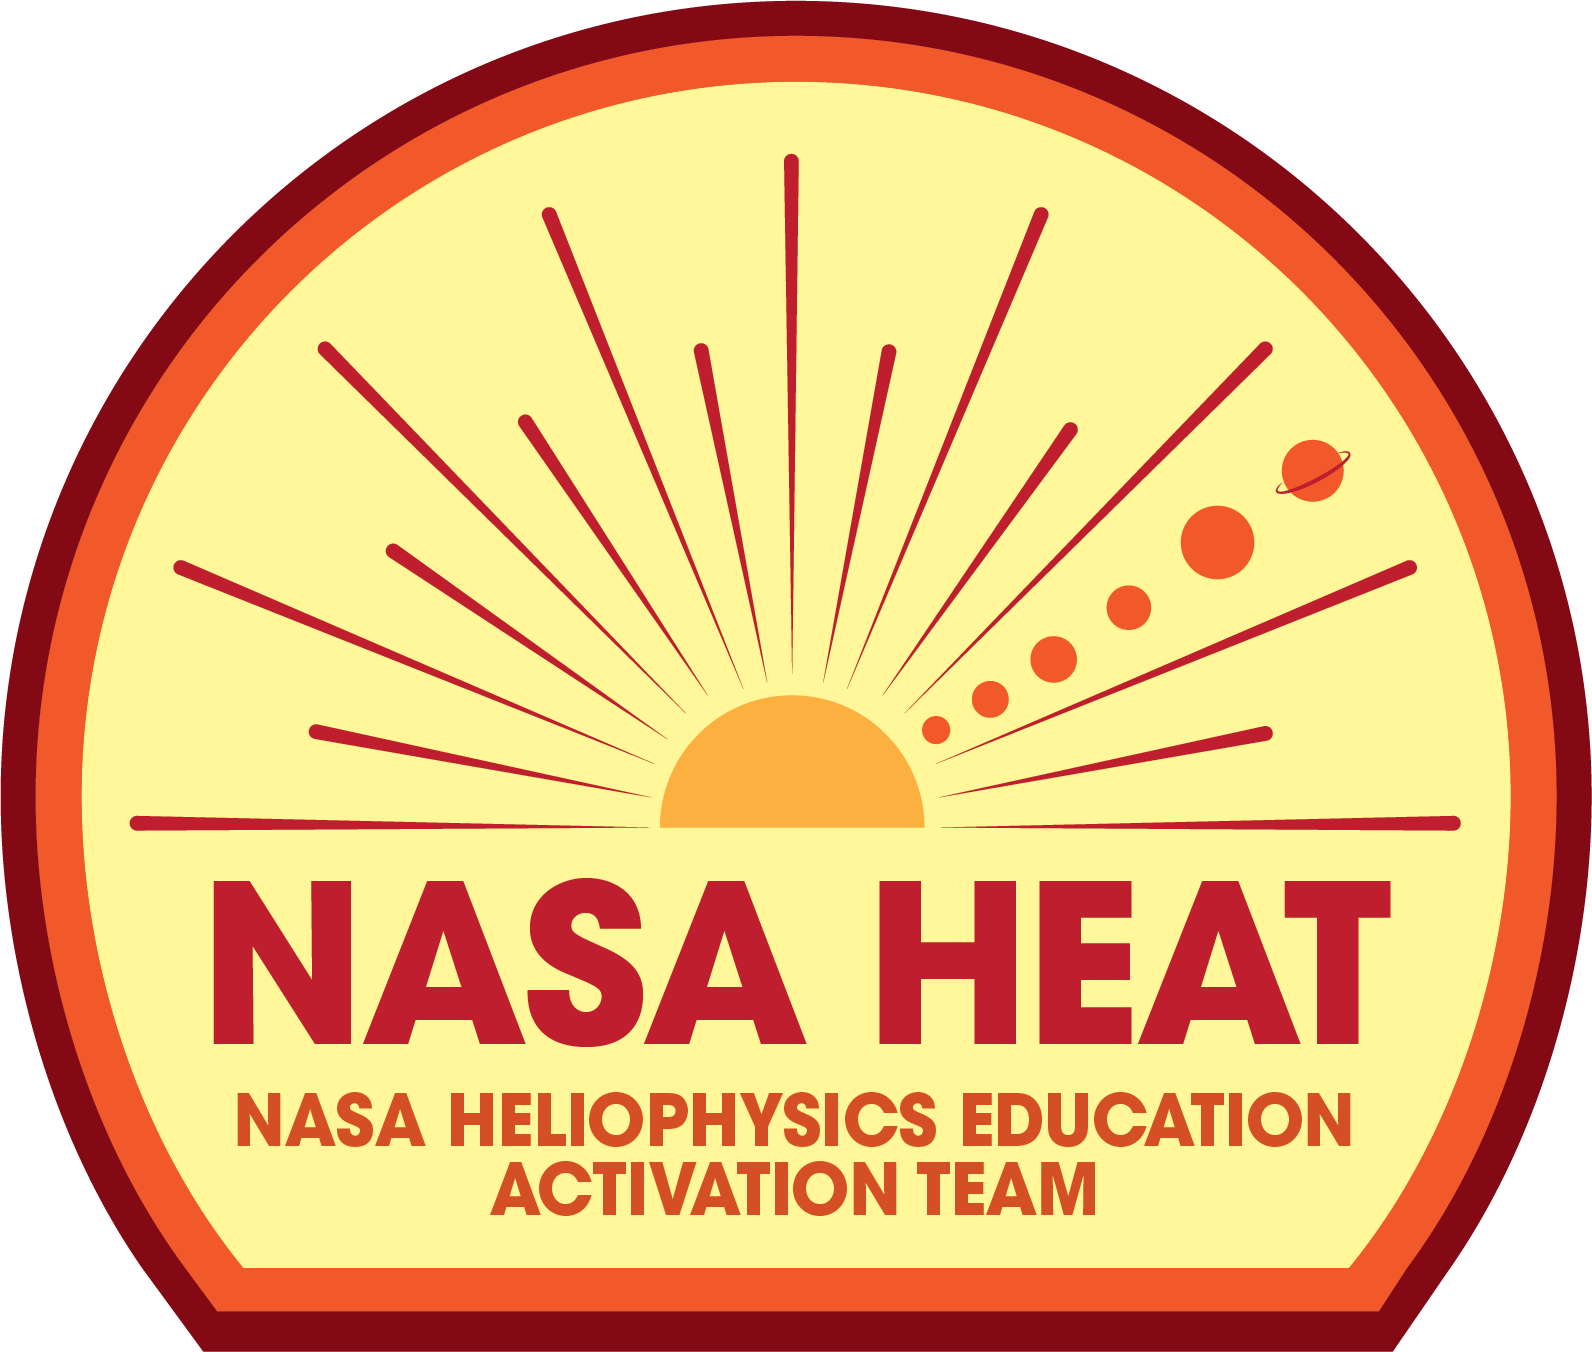 NASA Heliophysics Education Activation Team logo showing the Sun with rays leaving it. It also shows planets in the path of some of the Sun's radiation.